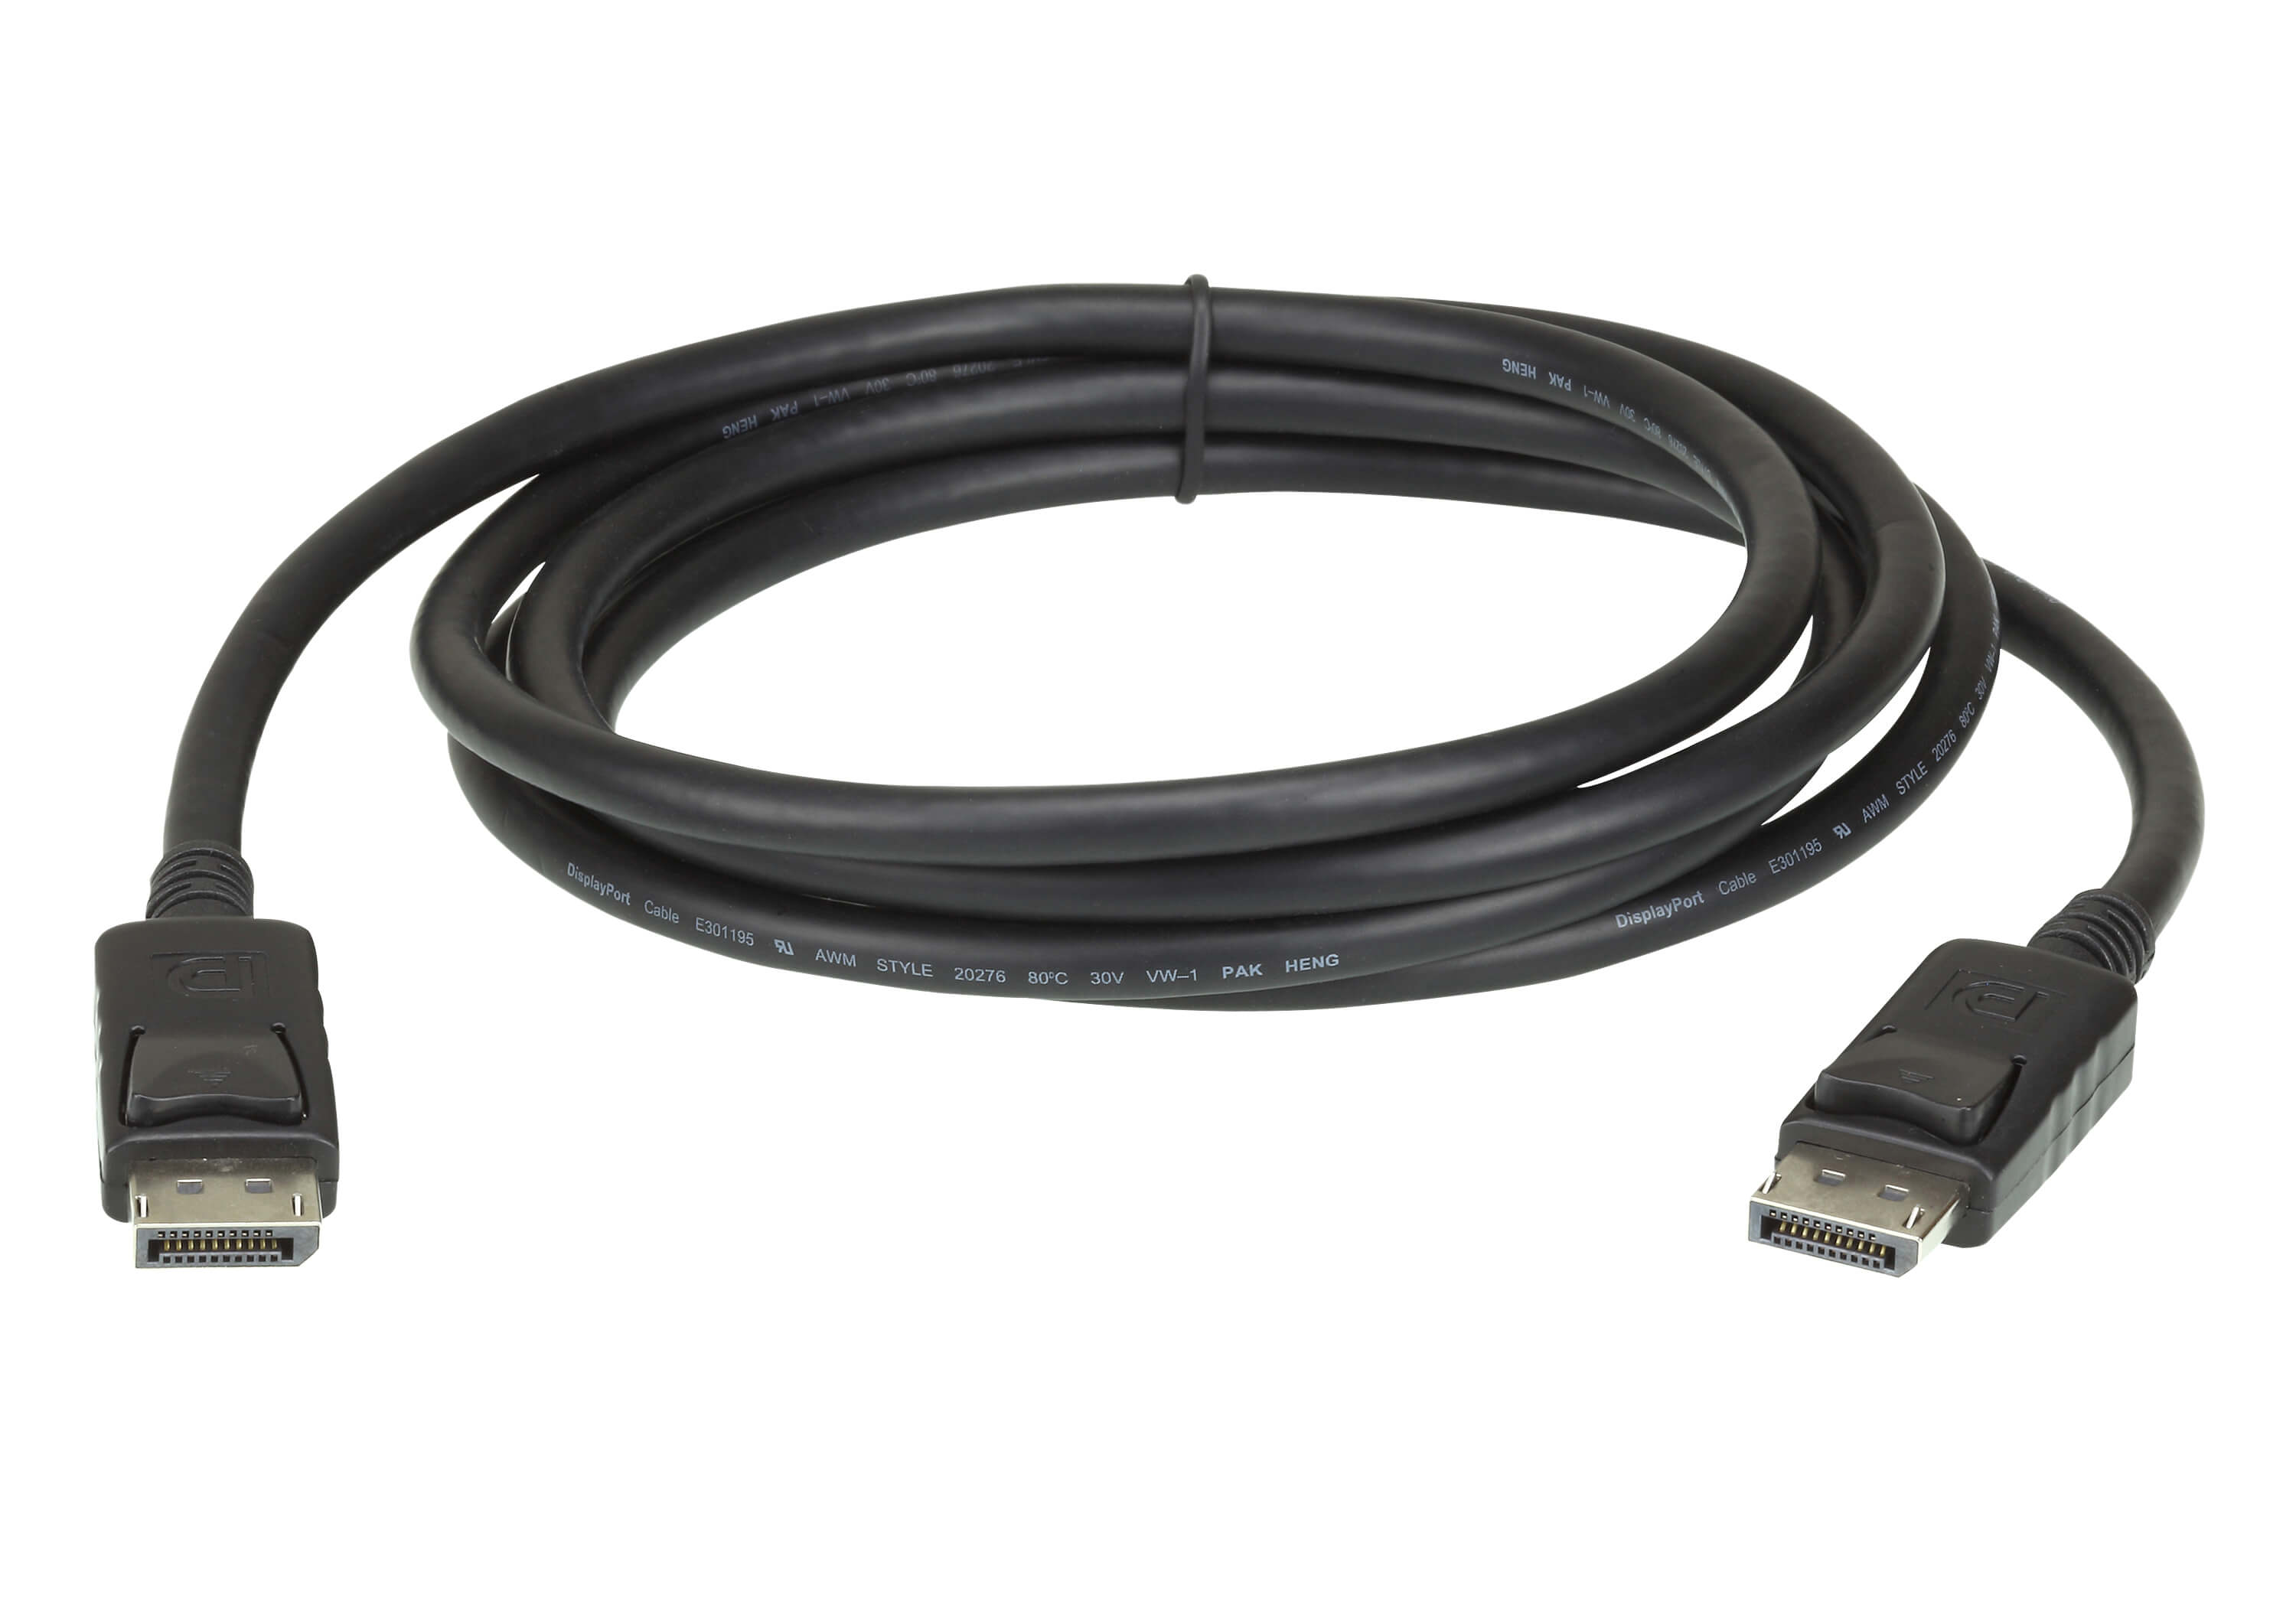 ATEN 4.6m DisplayPort Cable, supports up to 4K (3840 x 2160 @ 60Hz), DP 1.2, High Bit Rate 3 (HBR3) bandwidth of 21.6 Gbps ATEN